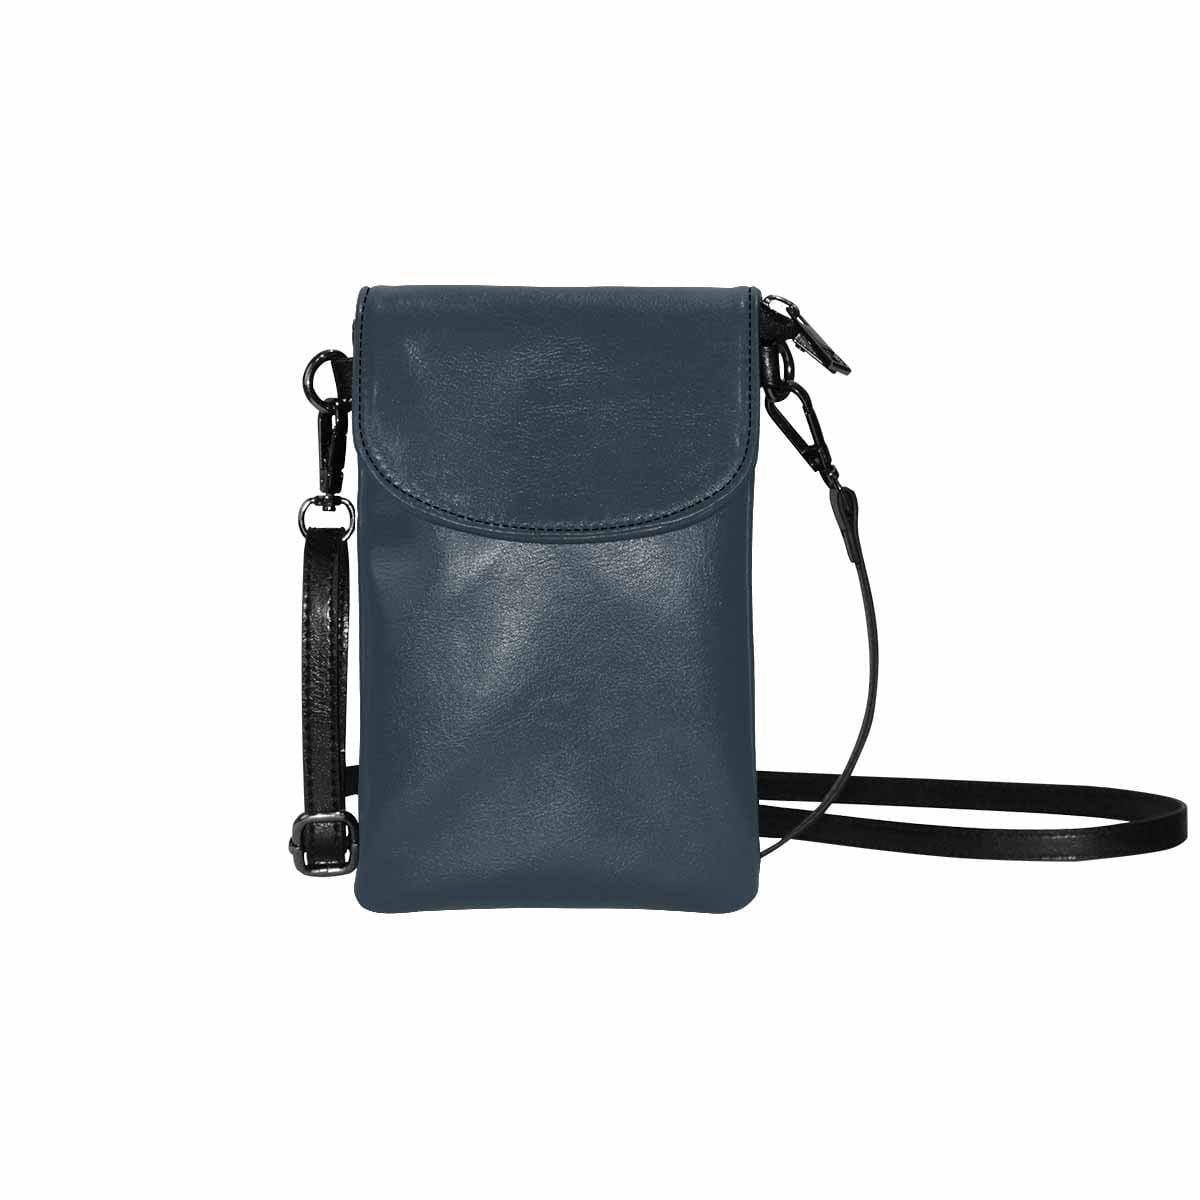 Womens Cell Phone Purse Charcoal Black - Bags | Wallets | Phone Cases